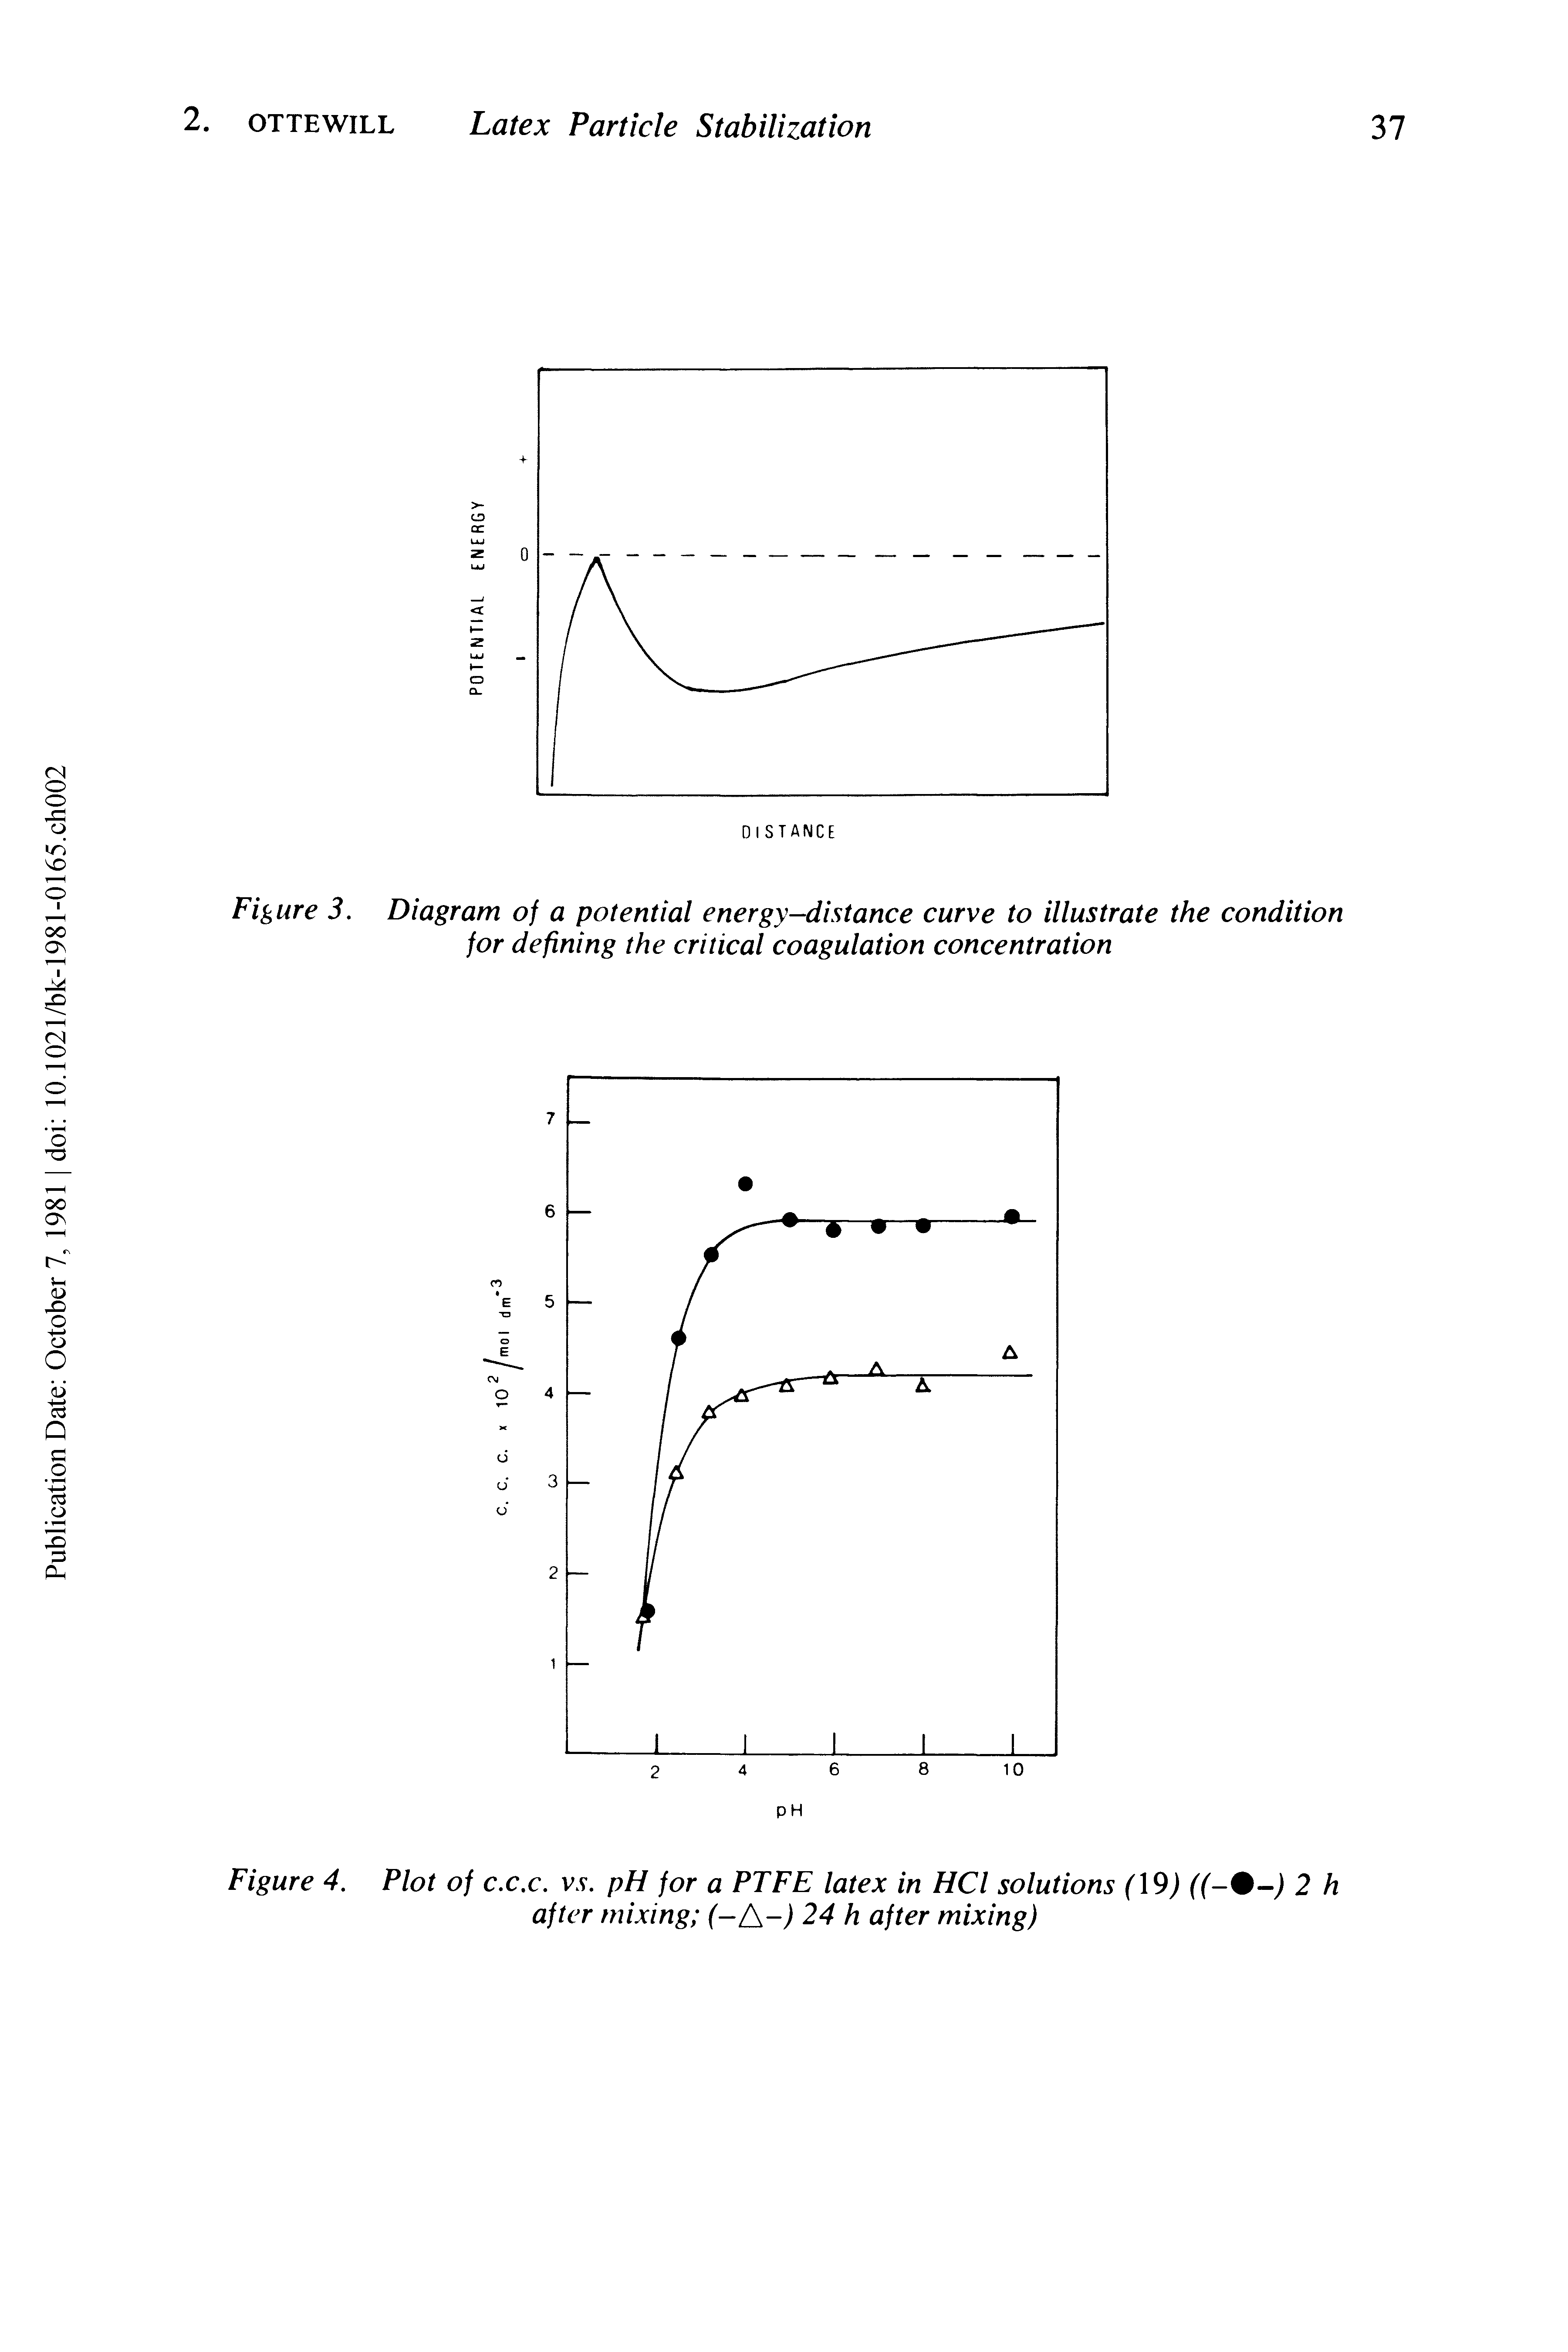 Figure 3. Diagram of a potential energy-distance curve to illustrate the condition for defining the critical coagulation concentration...